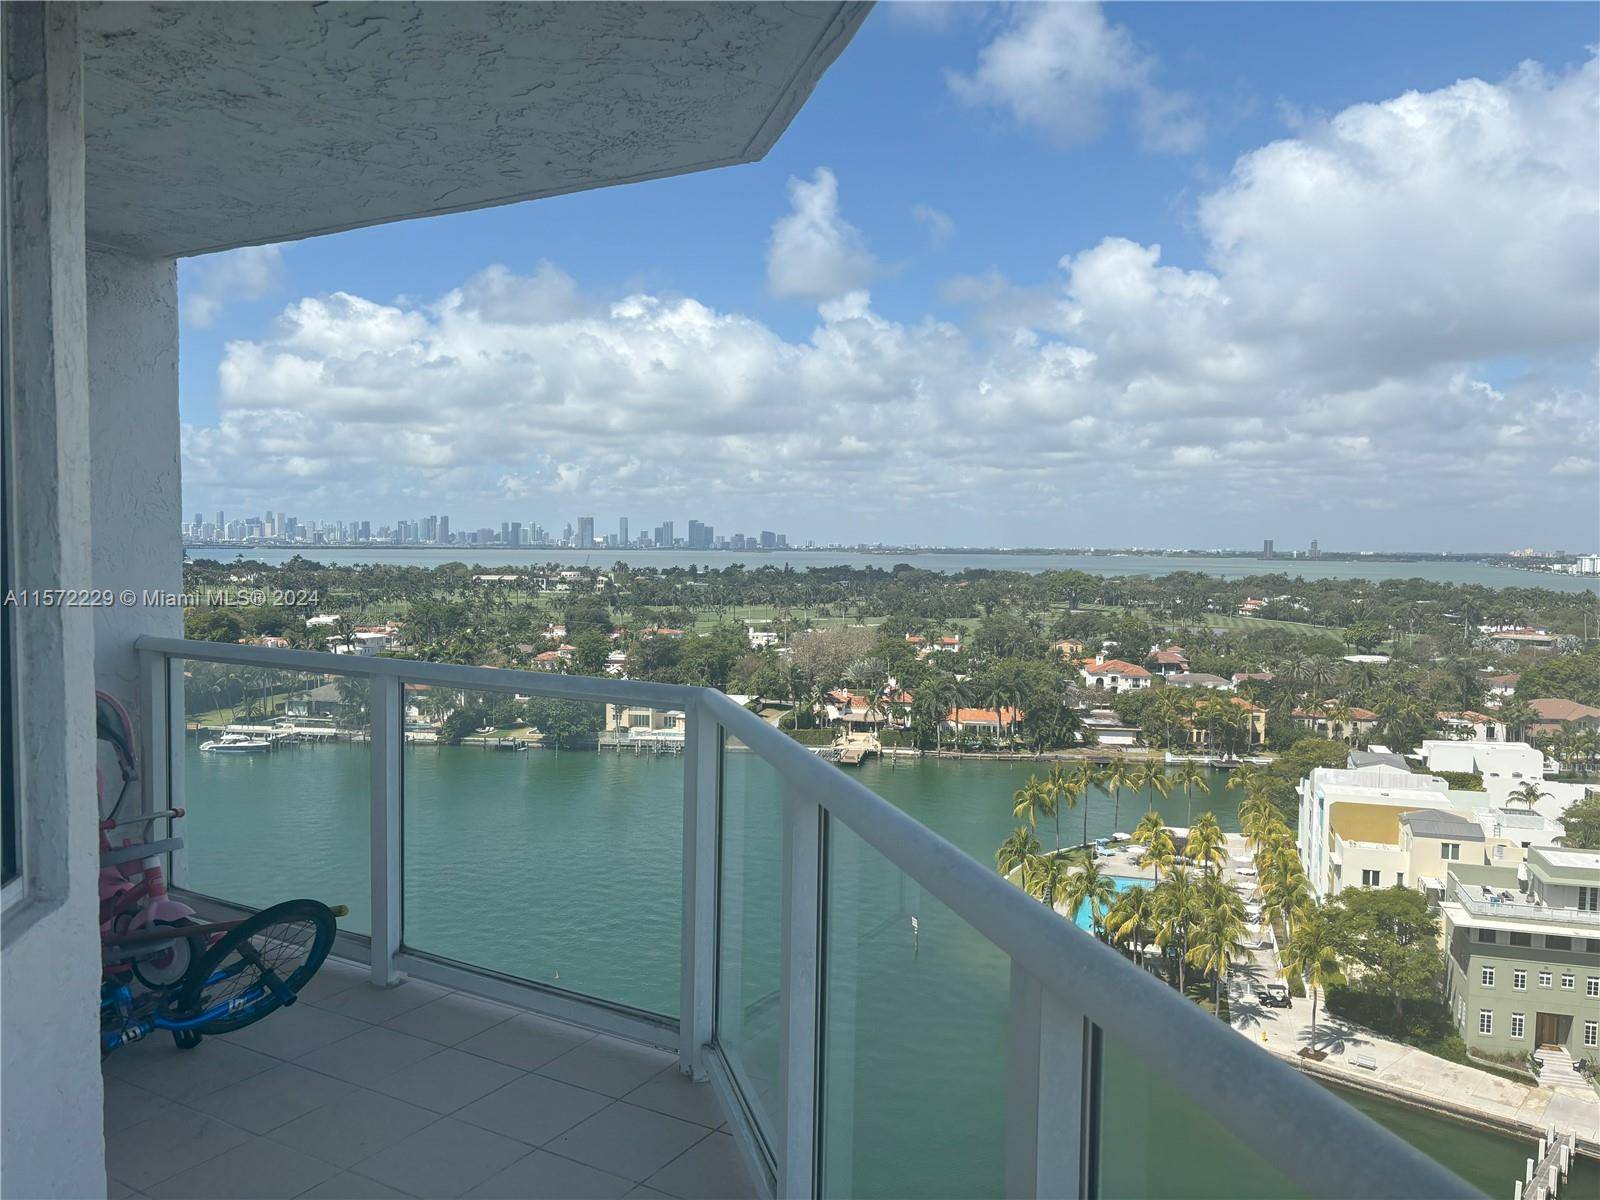 Unfurnished 3 bedroom, 2 bath Corner Unit at The Grandview with Panoramic Views of Miami Skyline, Biscayne Bay, Intracoastal, Miami Beach Ocean.